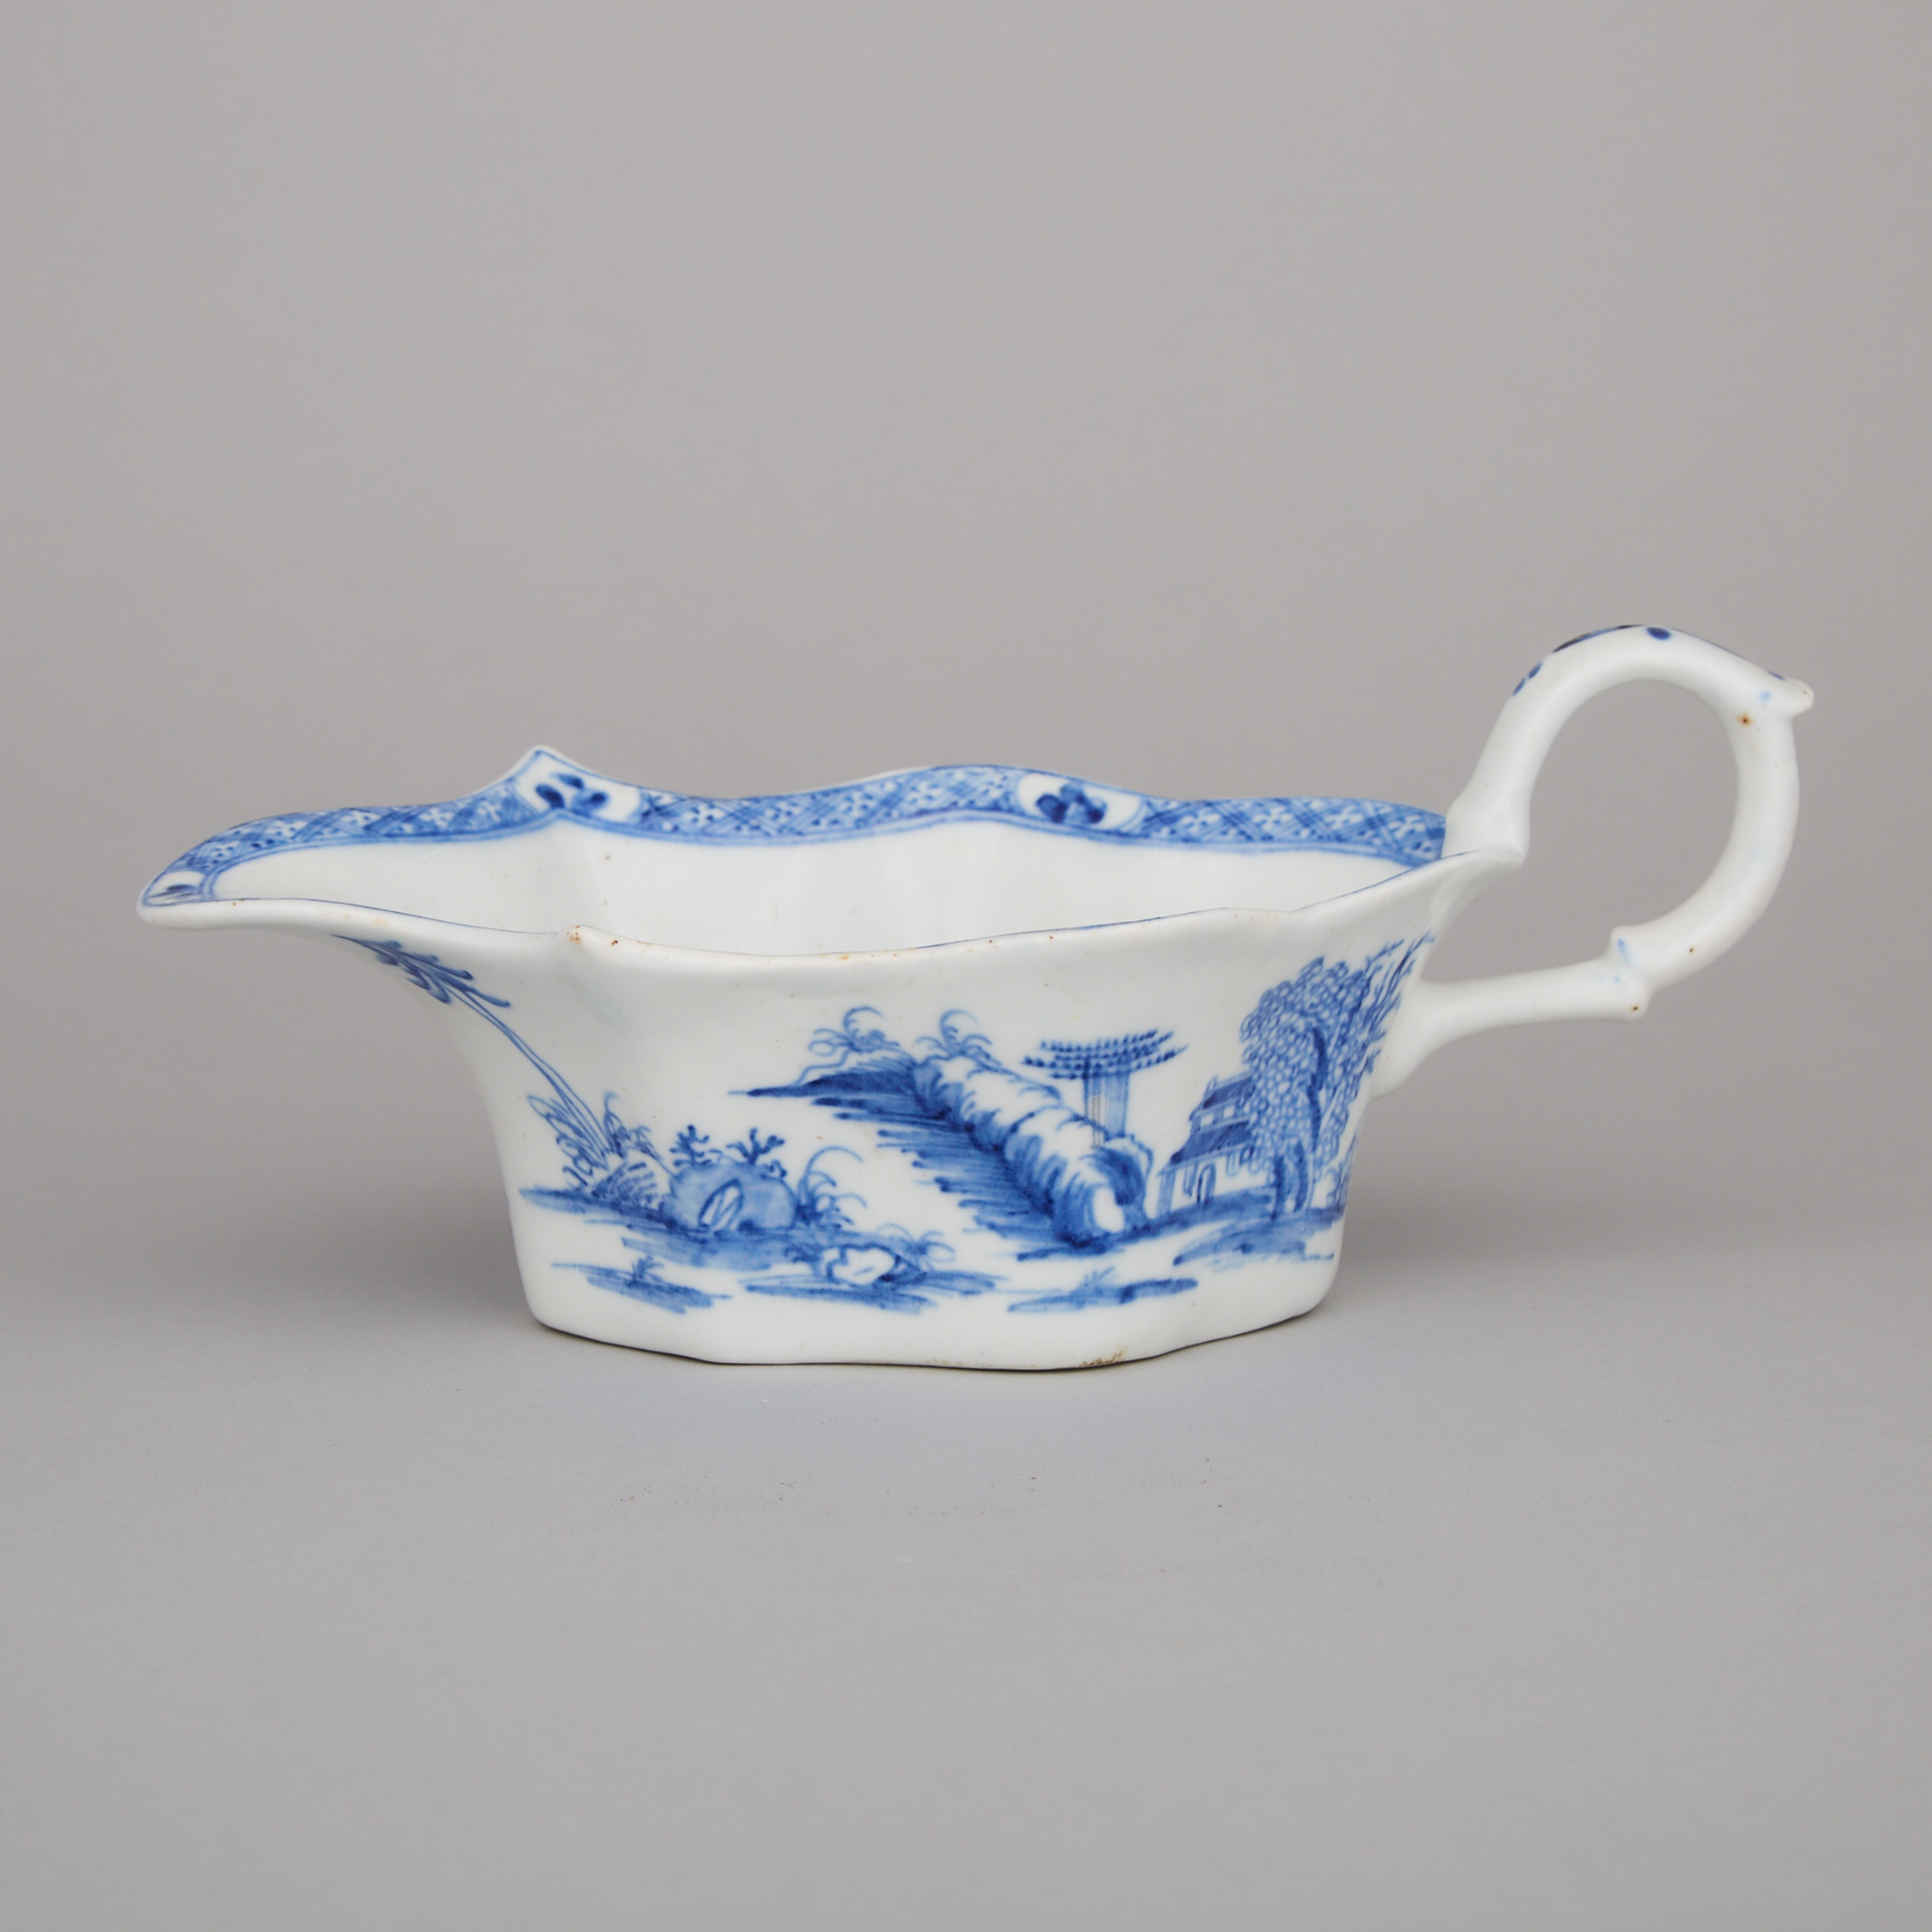 Bow 'Desirable Residence' Pattern Sauce Boat, c.1755